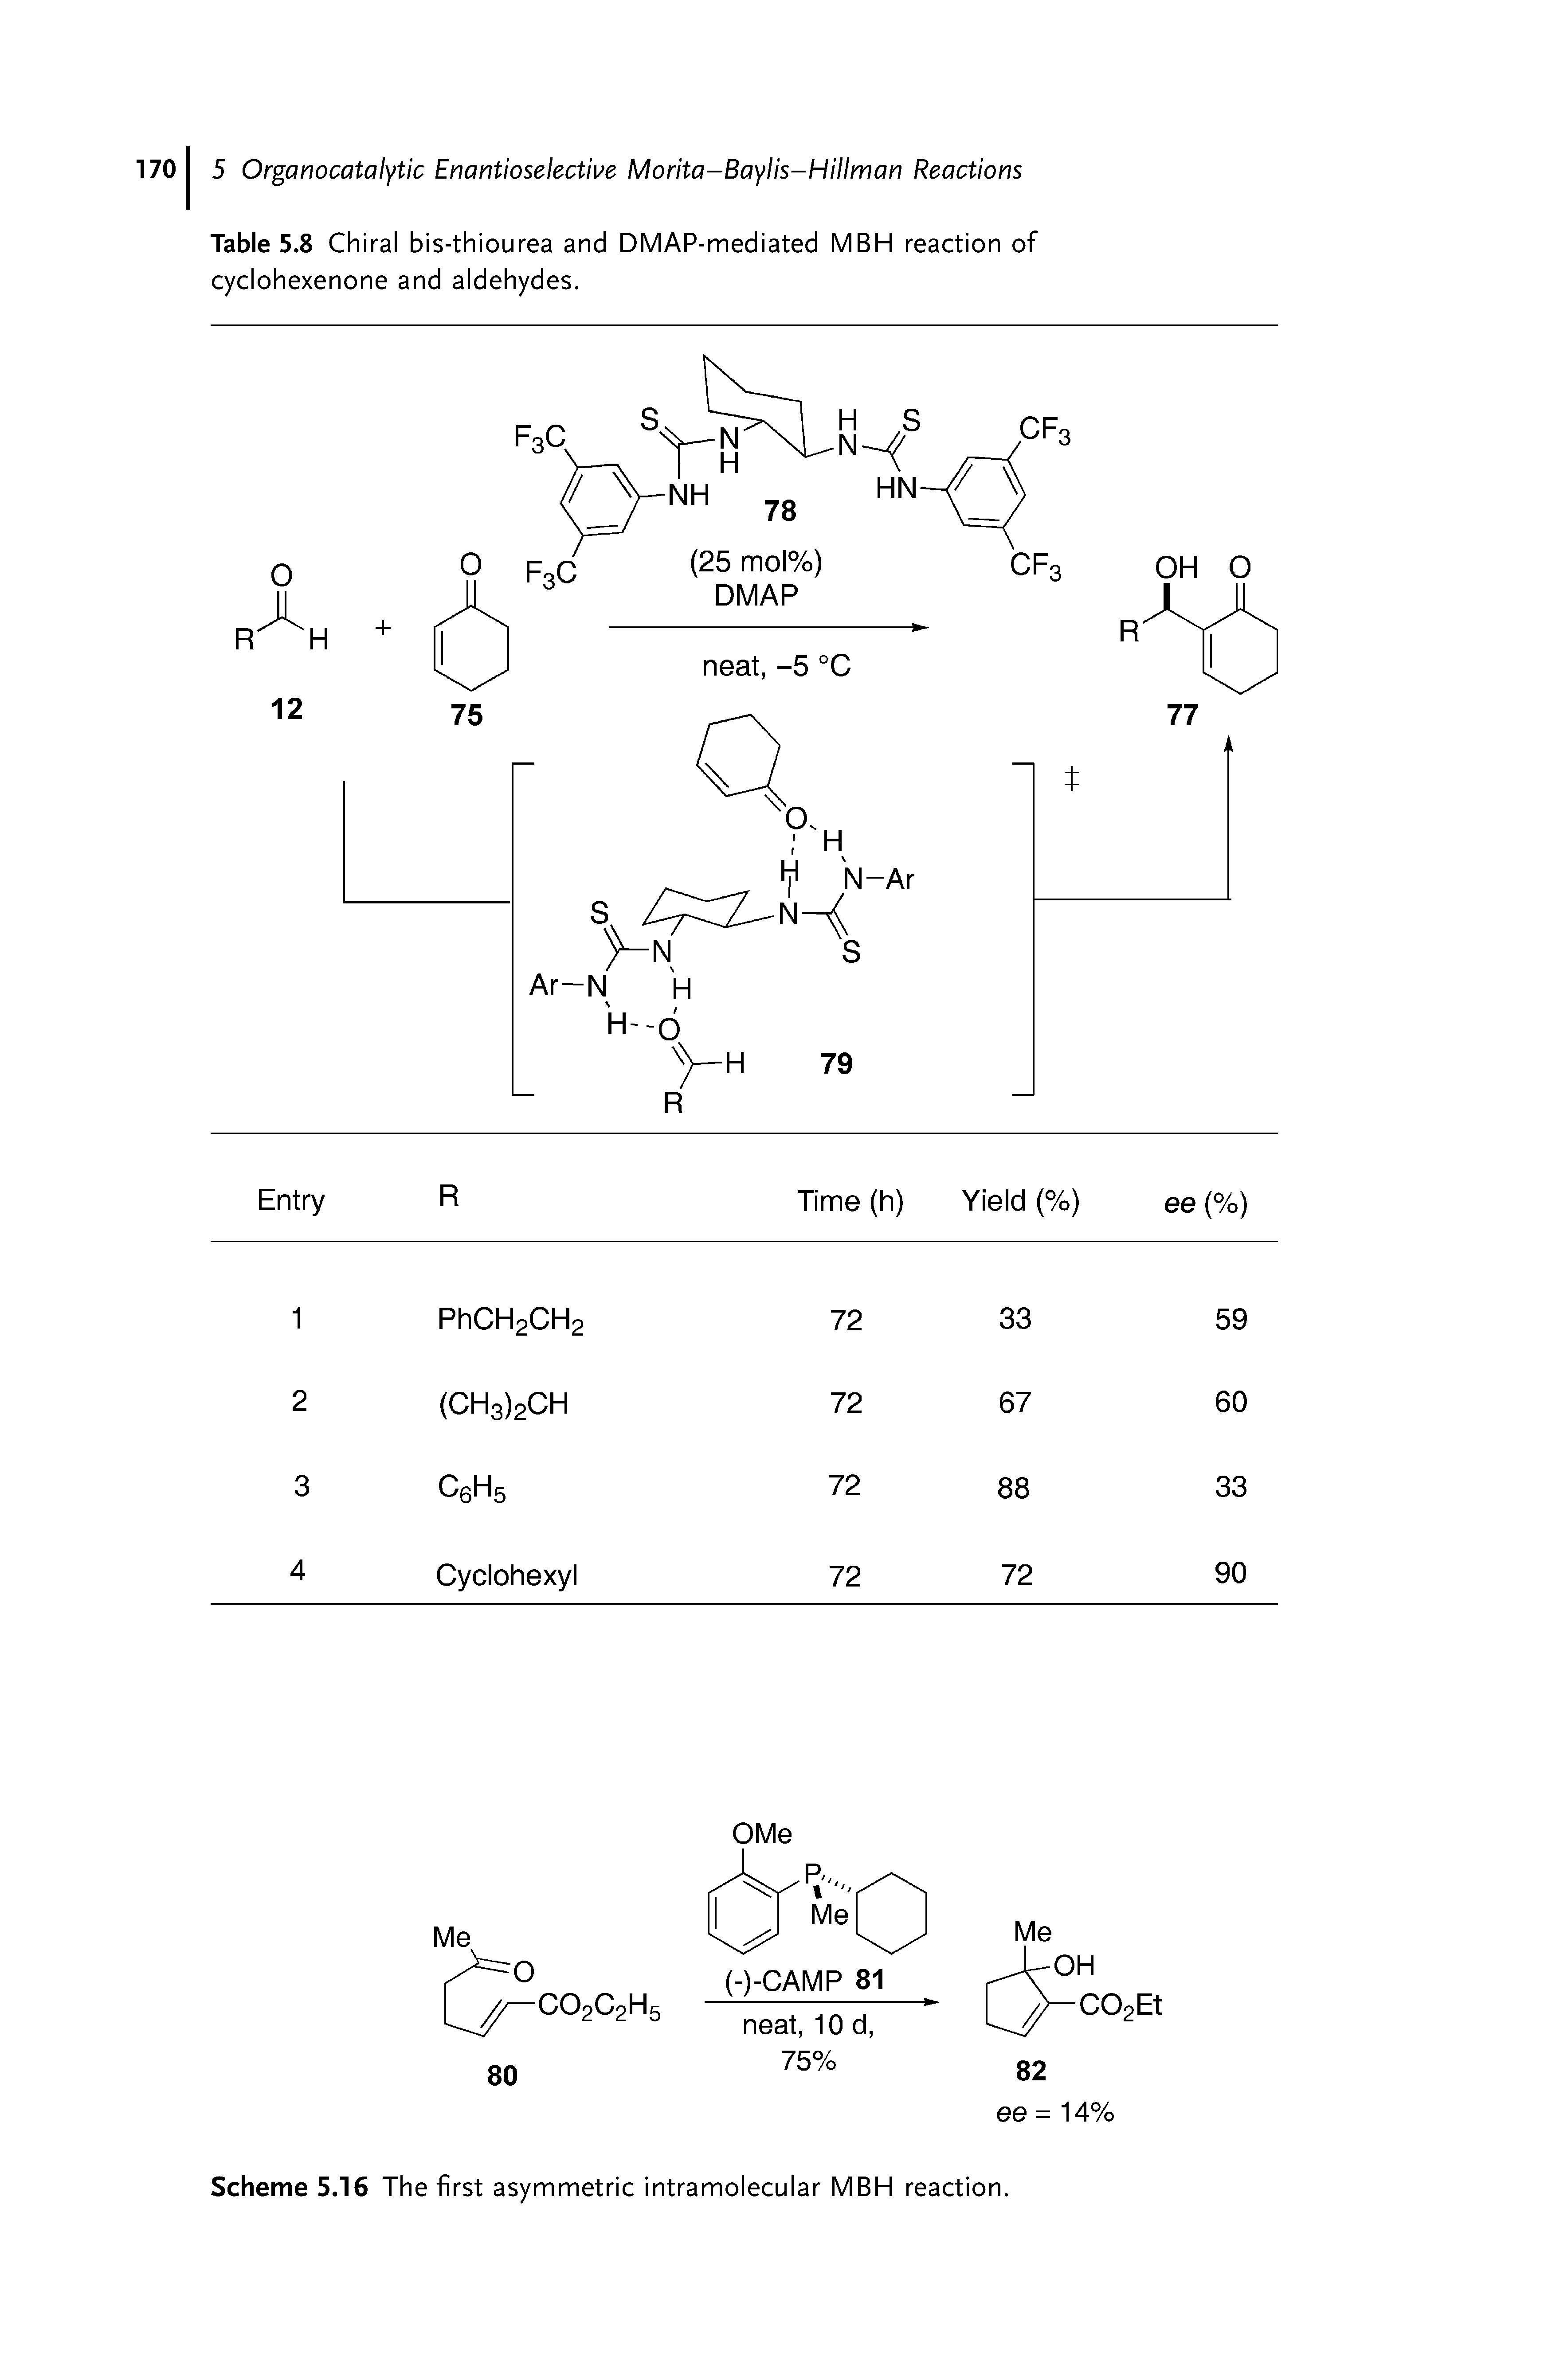 Table 5.8 Chiral bis-thiourea and DMAP-mediated MBH reaction of cyclohexenone and aldehydes.